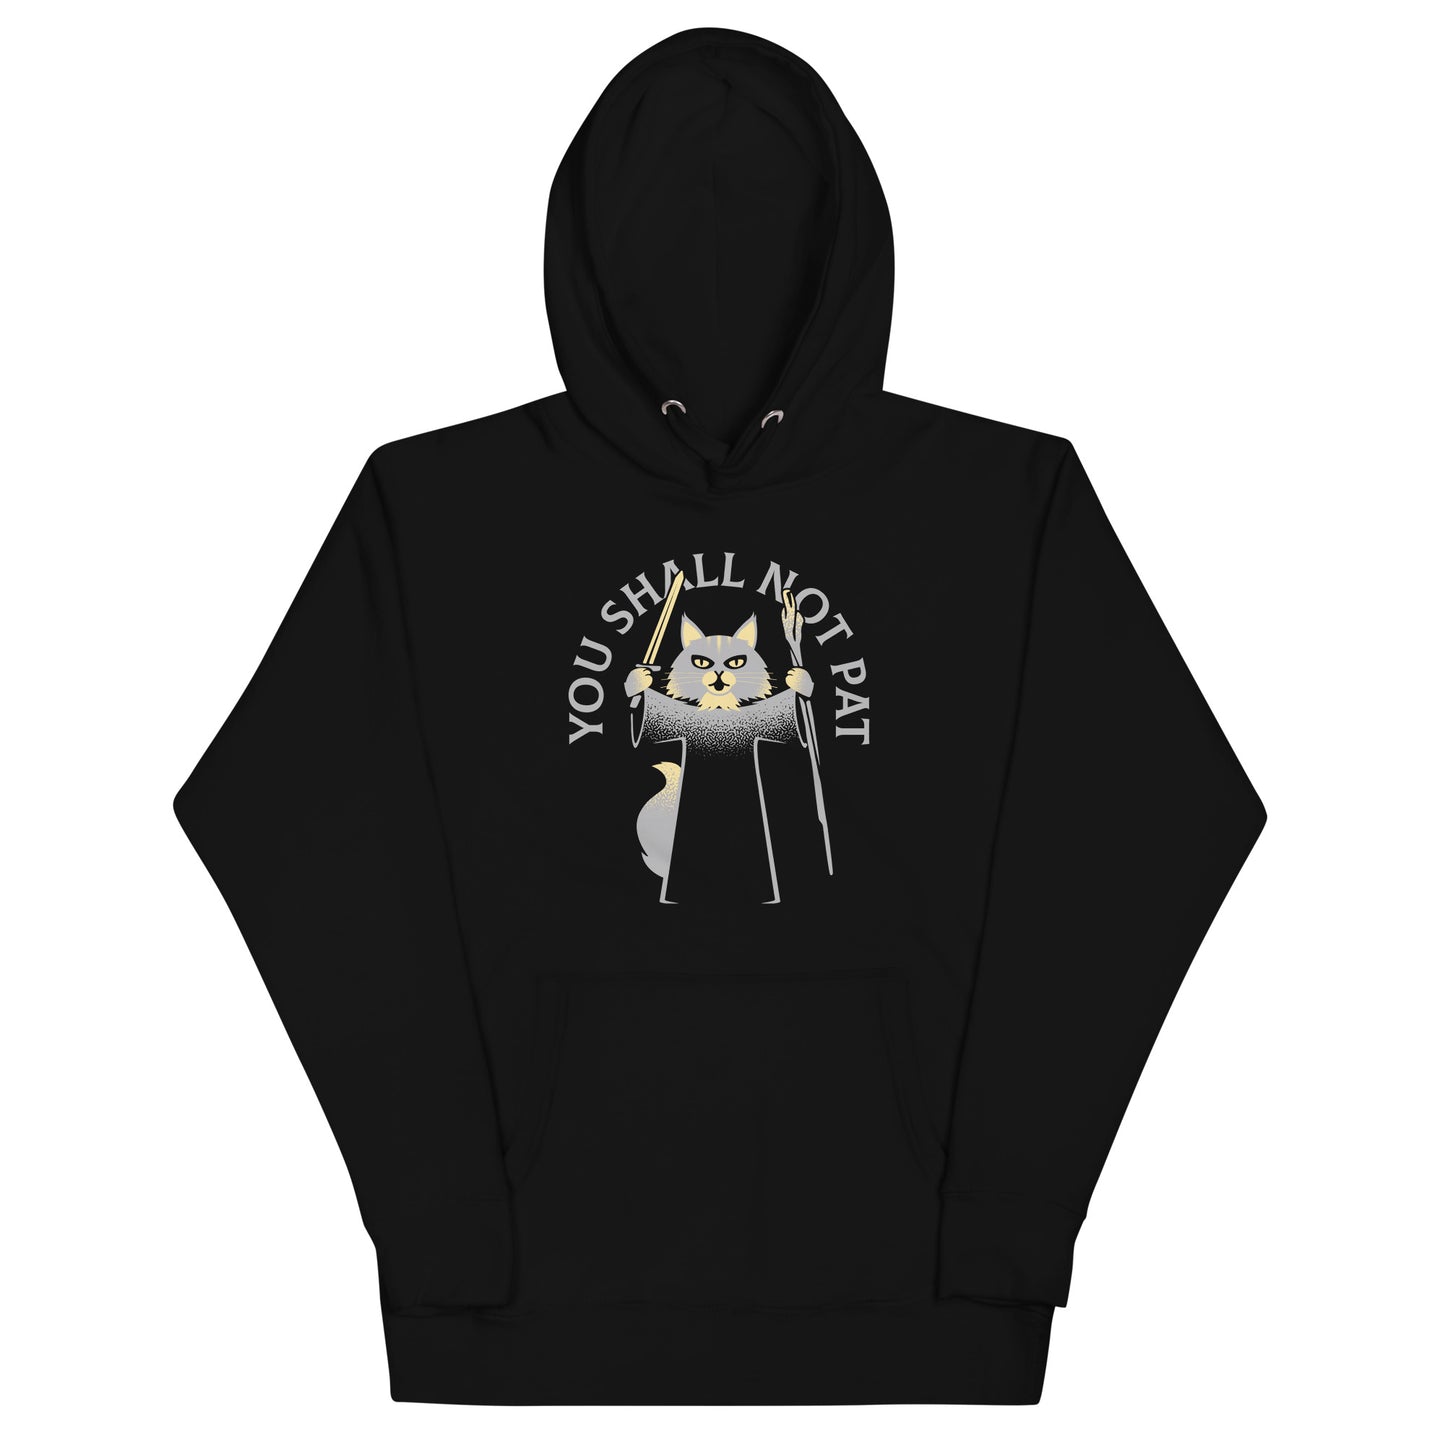 You Shall Not Pat Unisex Hoodie